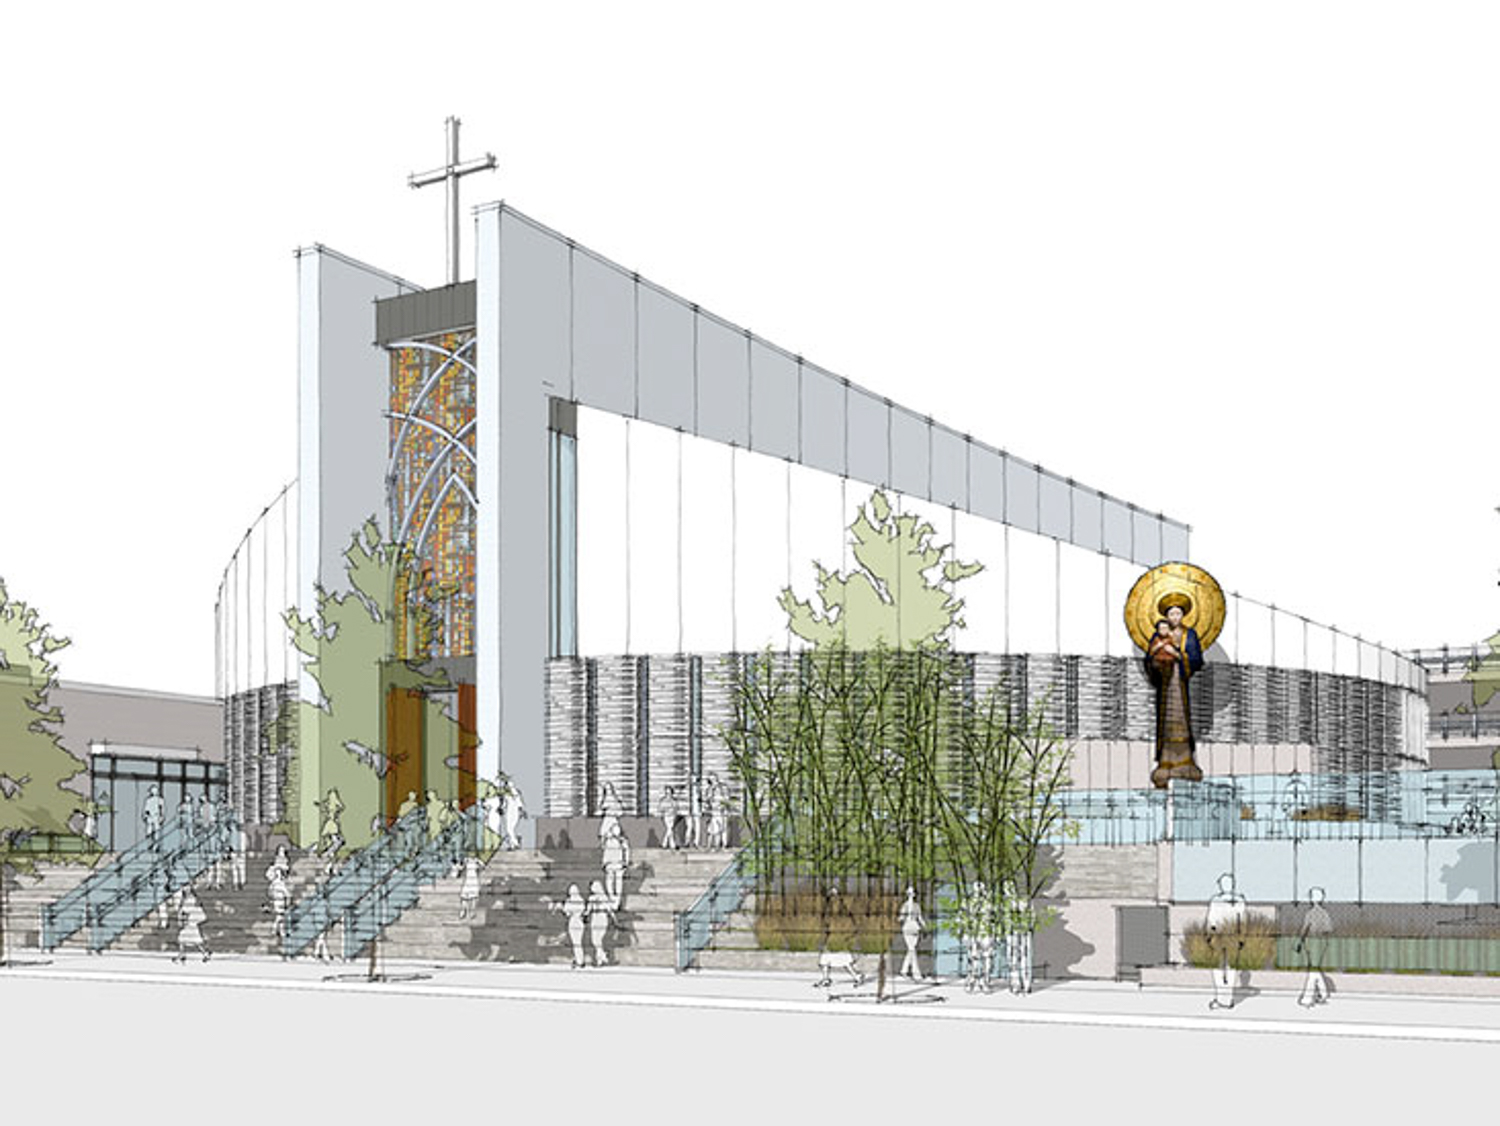 OLLV Church outside perspective, illustration by SIM Architects